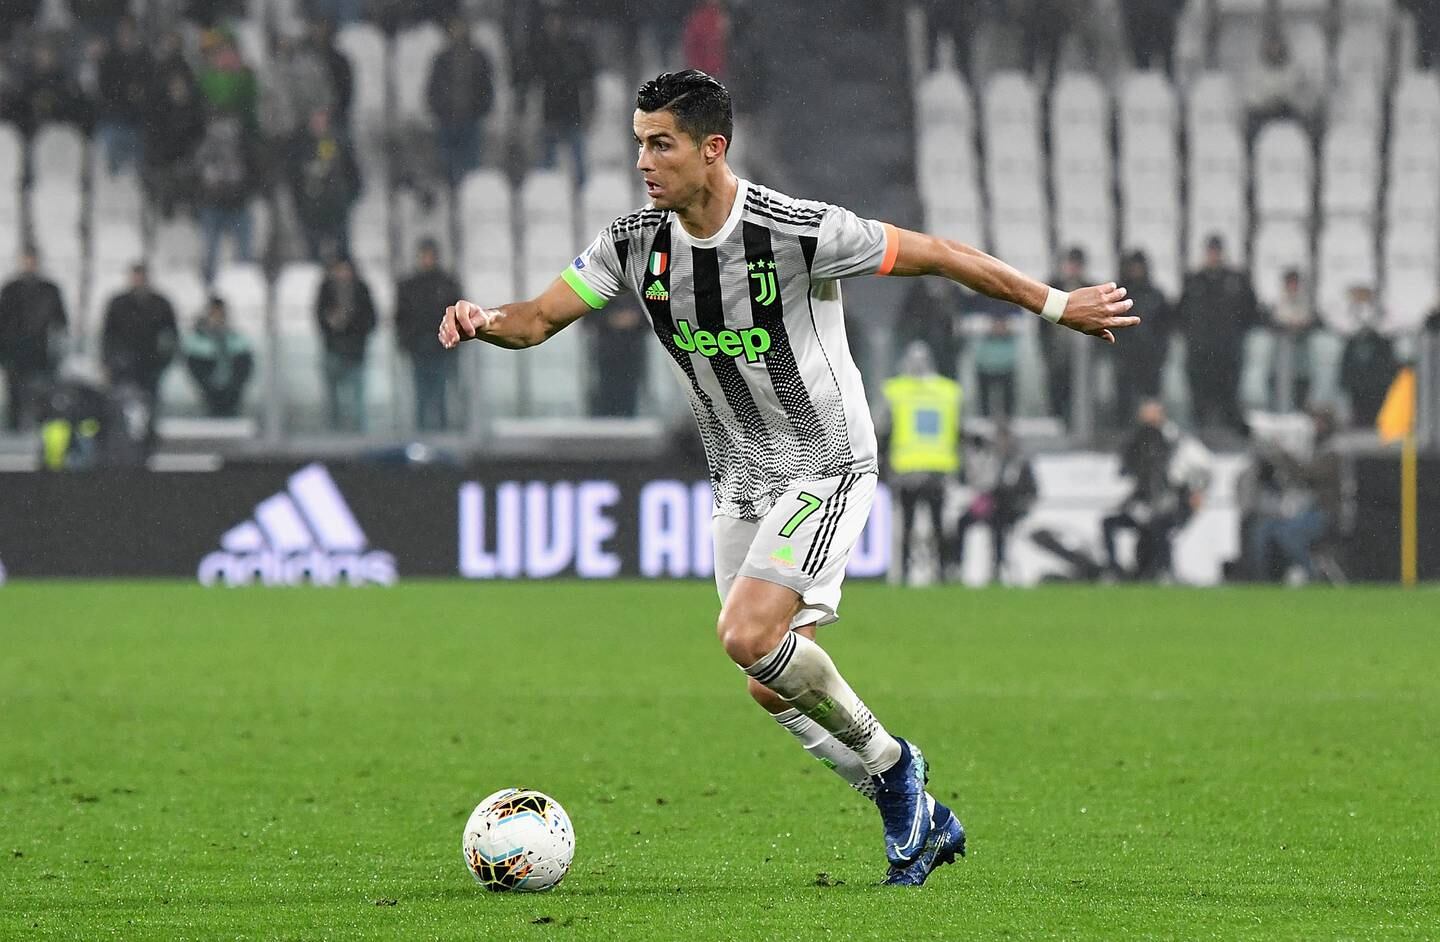 Cristiano Ronaldo in action for Juventus in 2019. Getty